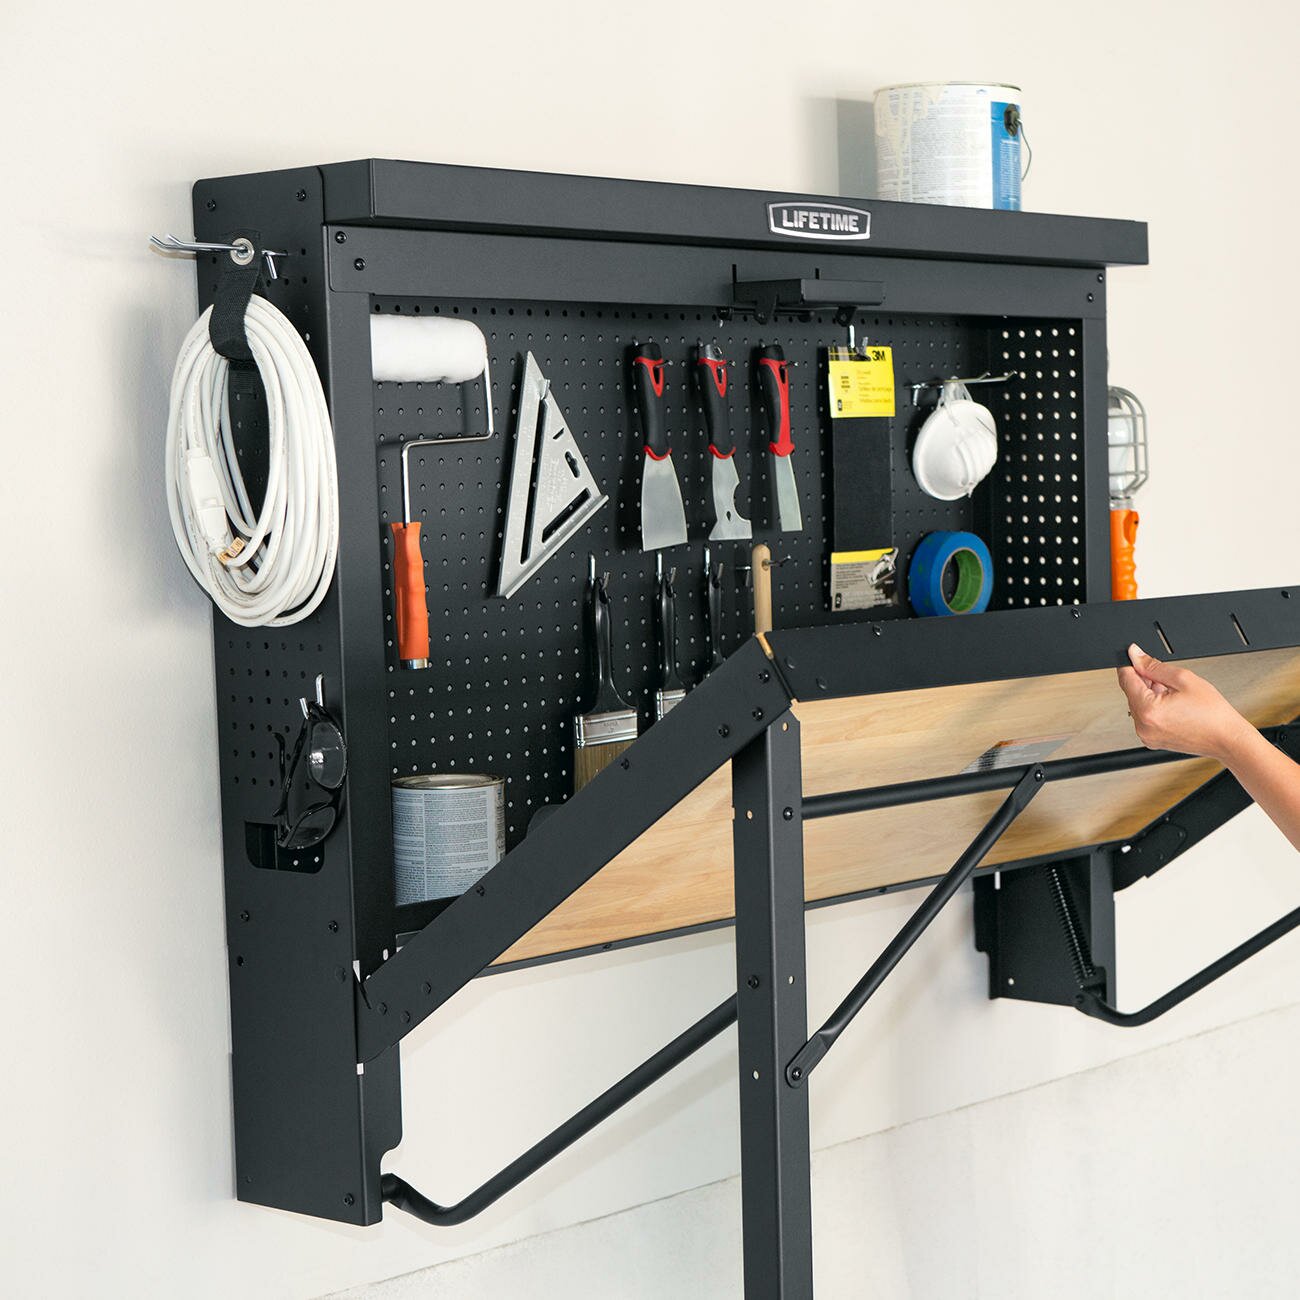 Wall Mounted Folding Workbench for Exciting Workspace Furniture Ideas: Wall Mounted Folding Workbench | Wall Mounted Workbench | Floating Workbench